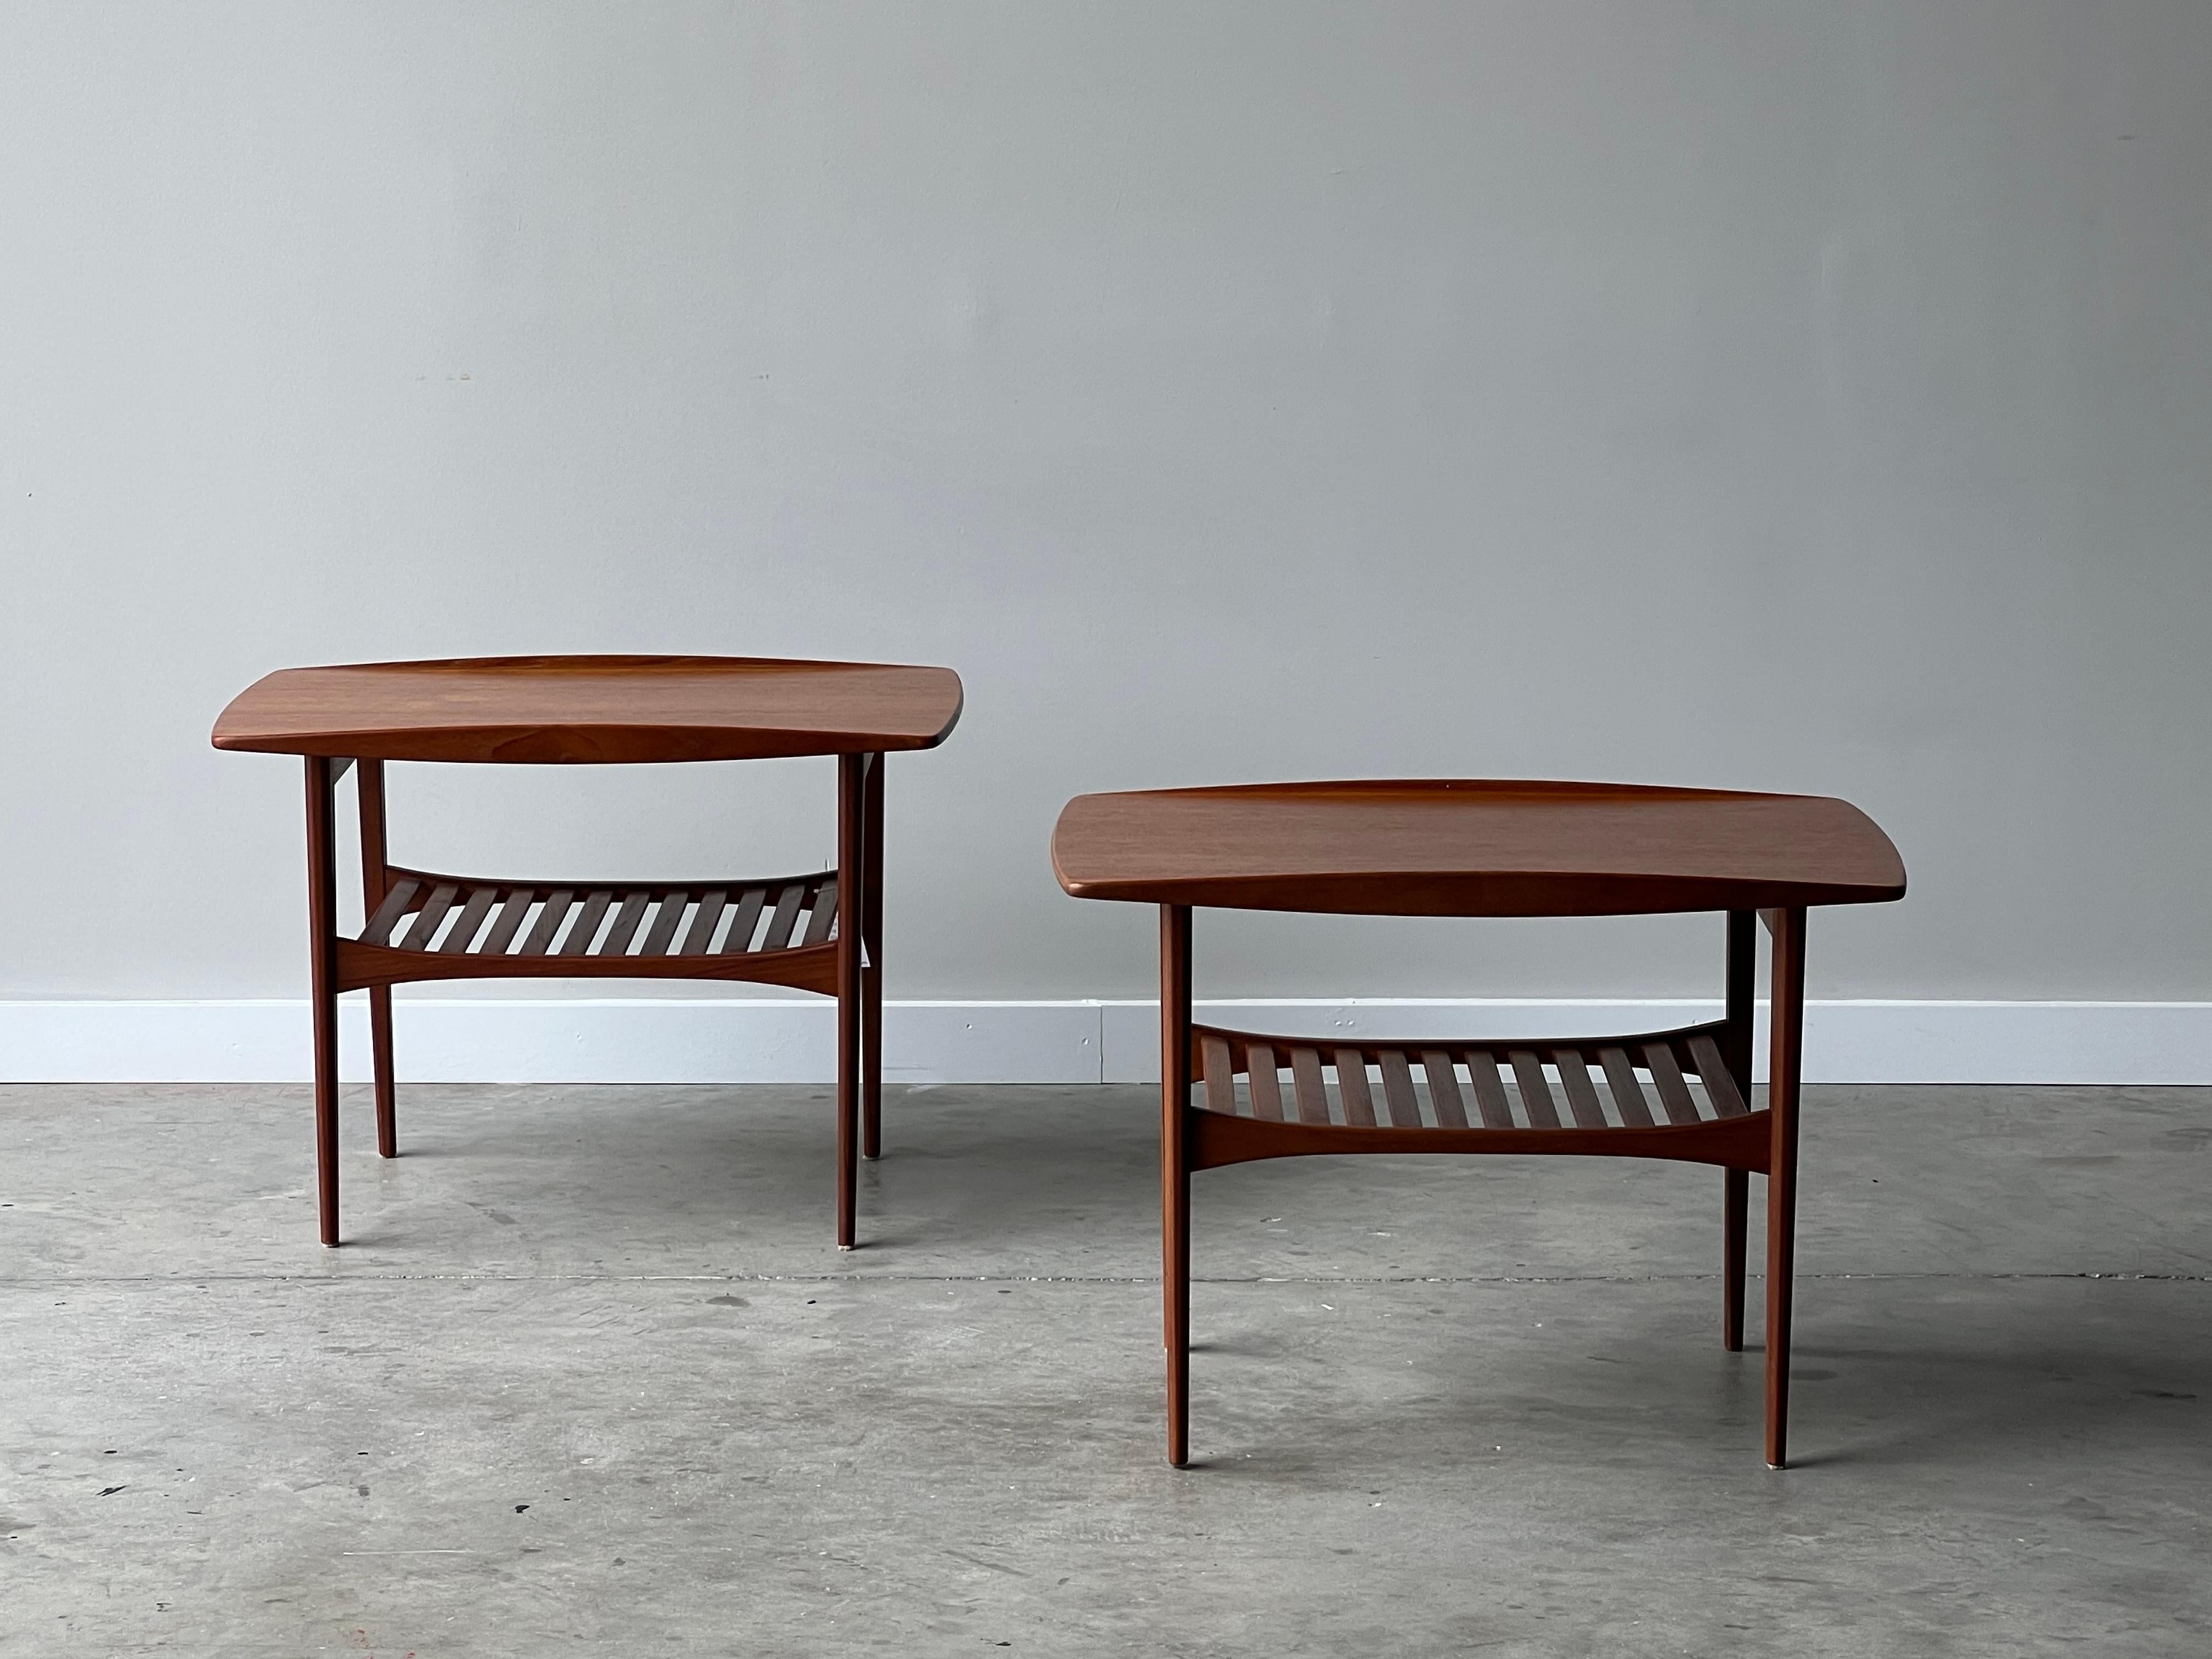 Pair of side tables designed by Grete Jalk for France & Son, Denmark. Made circa 1960s with teak wood. These beautifully crafted end tables have raised fin edges atop and slats below. The wooden slats are perfect for book or magazine storage. In